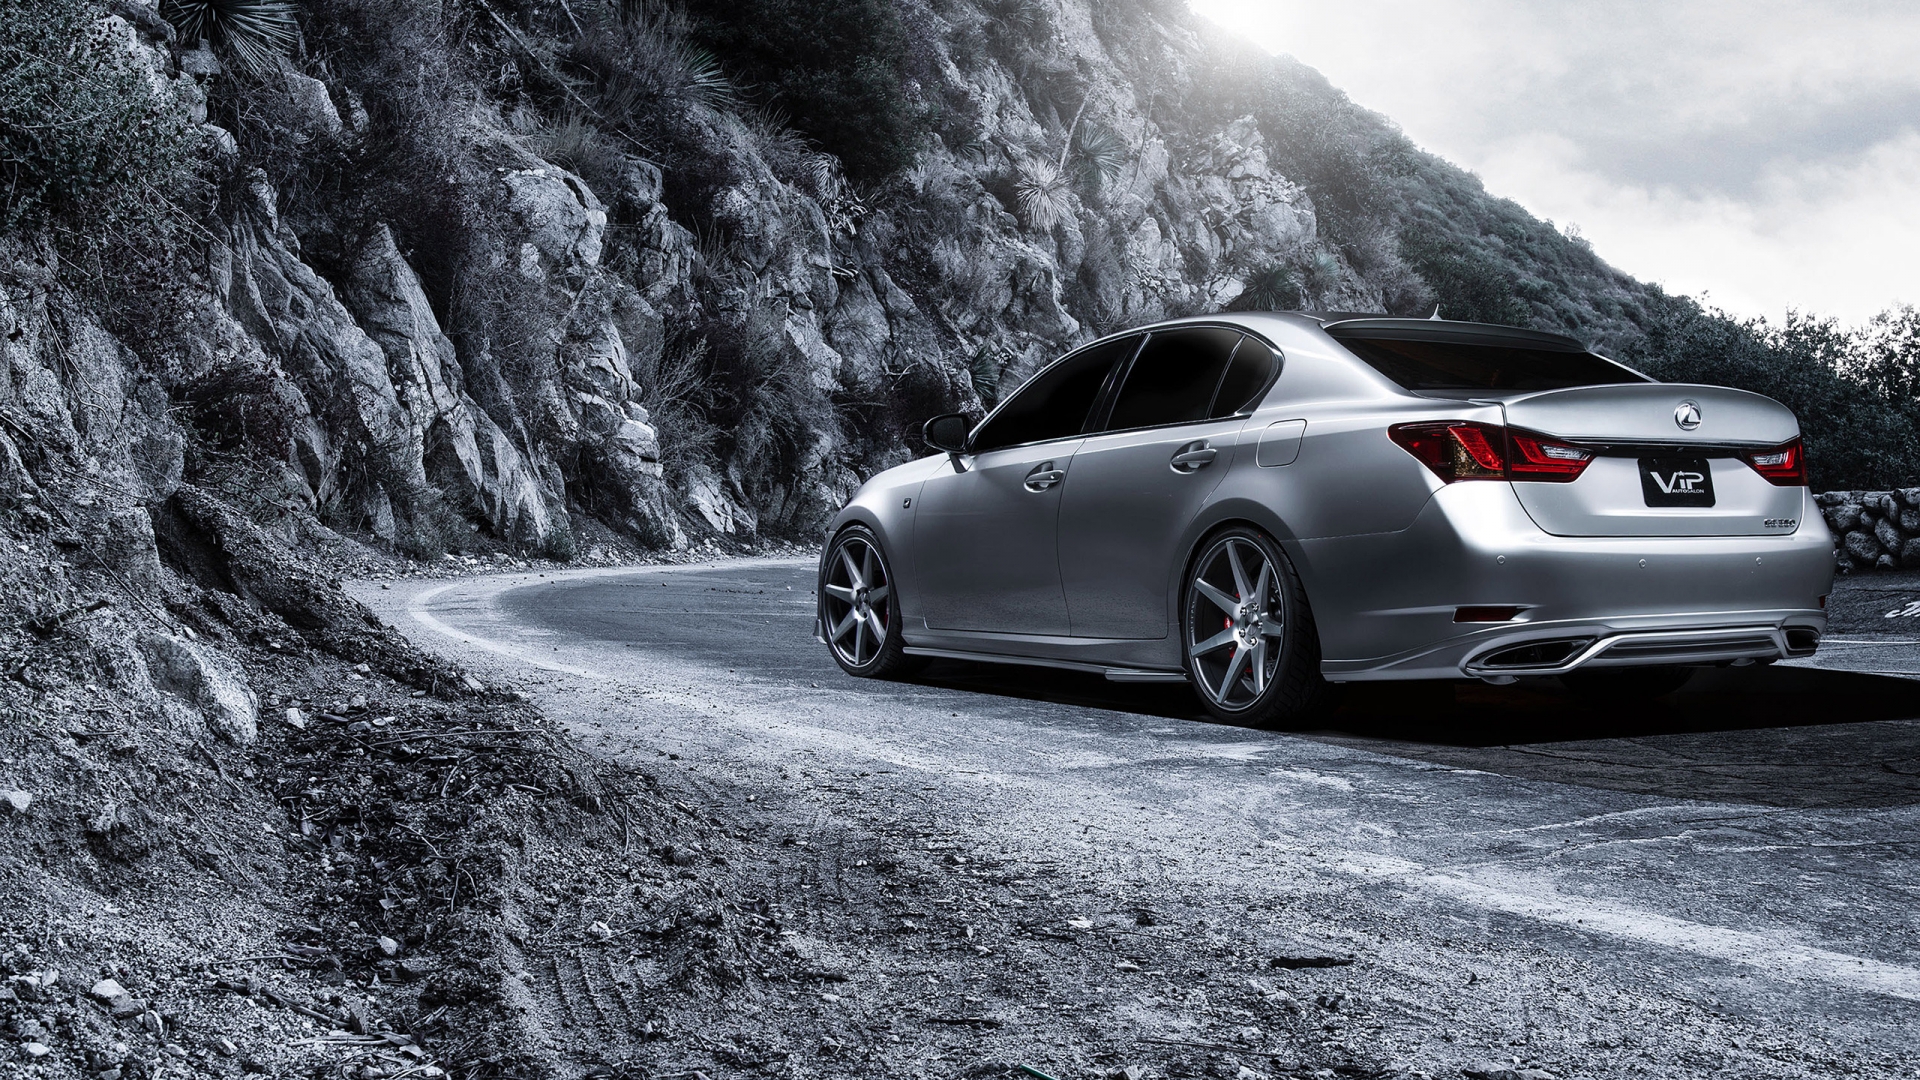 Lexus GS 350 Supercharged Rear for 1920 x 1080 HDTV 1080p resolution